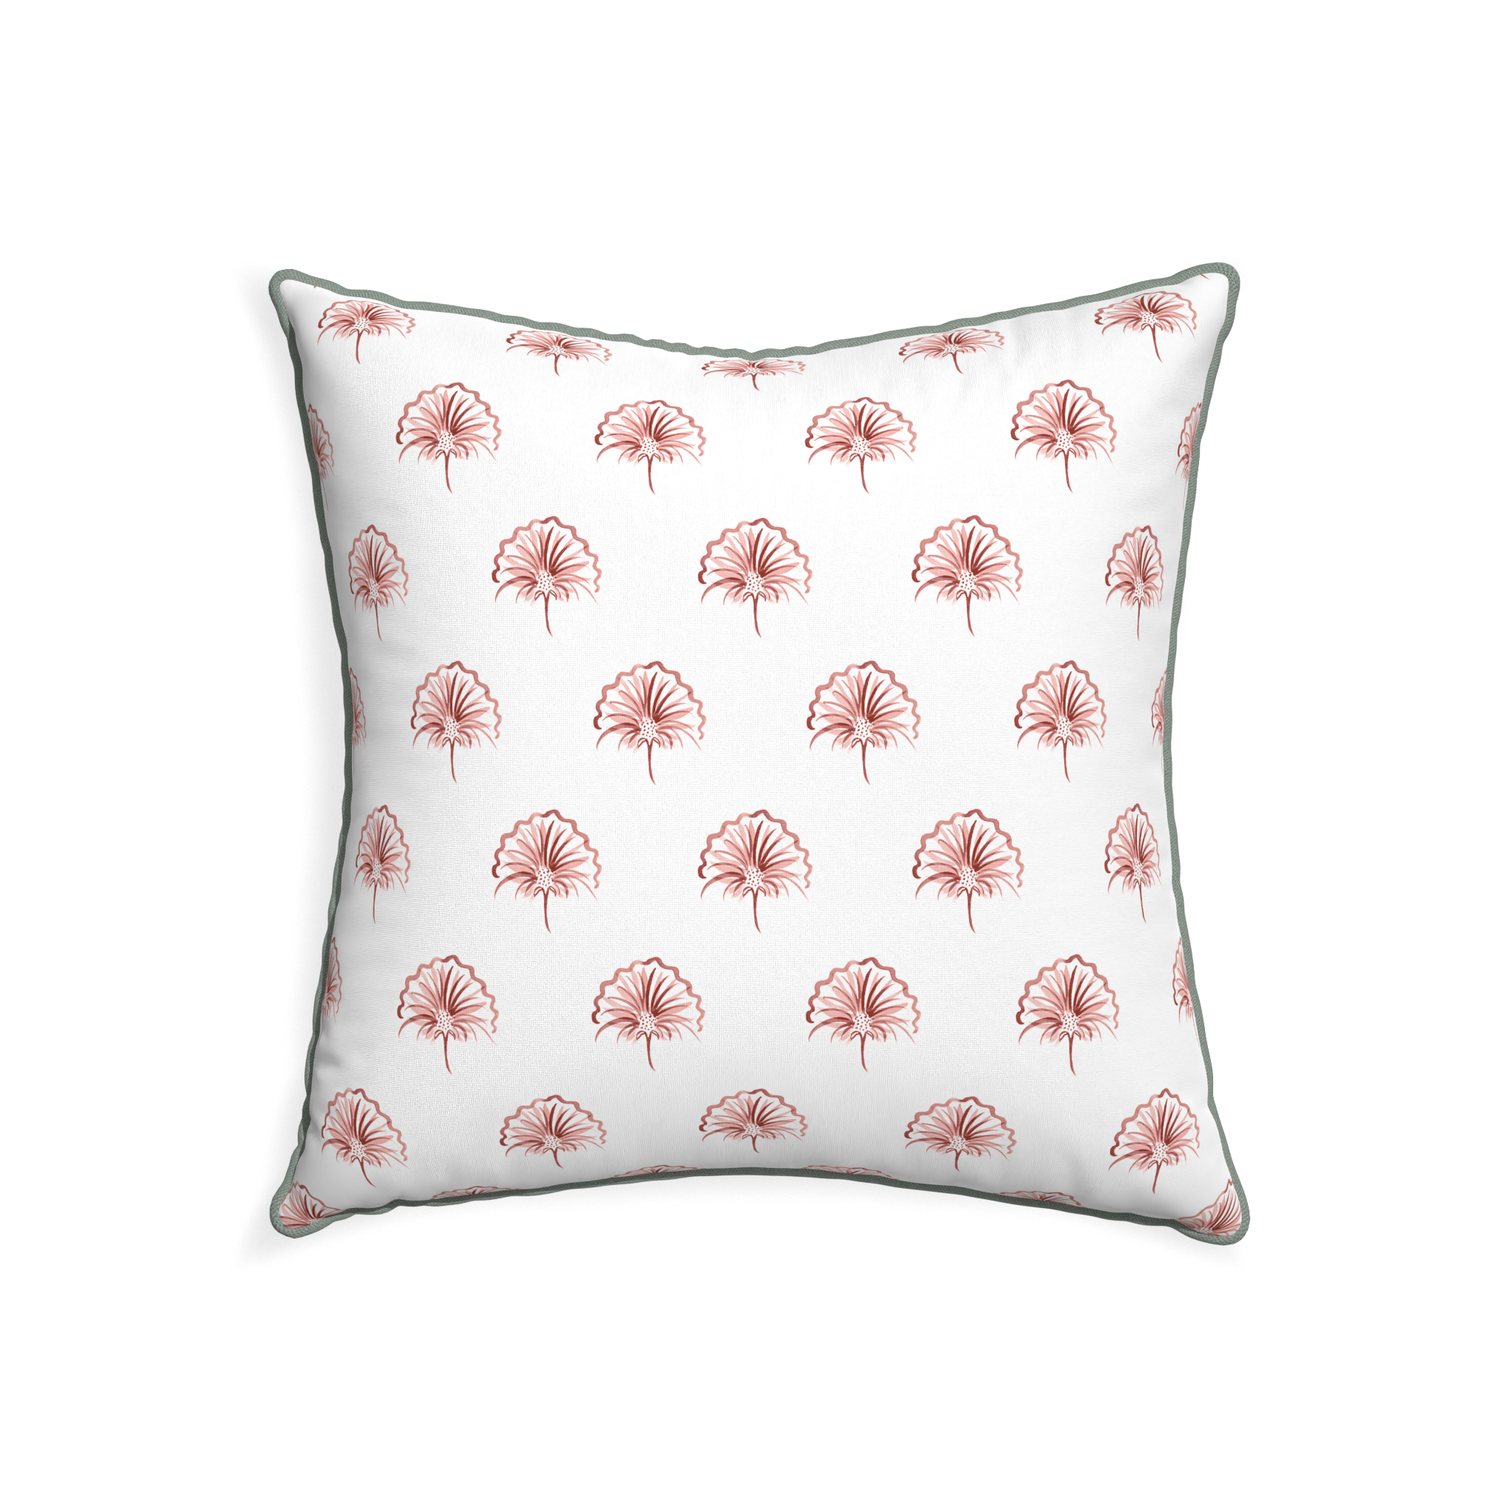 22-square penelope rose custom floral pinkpillow with sage piping on white background